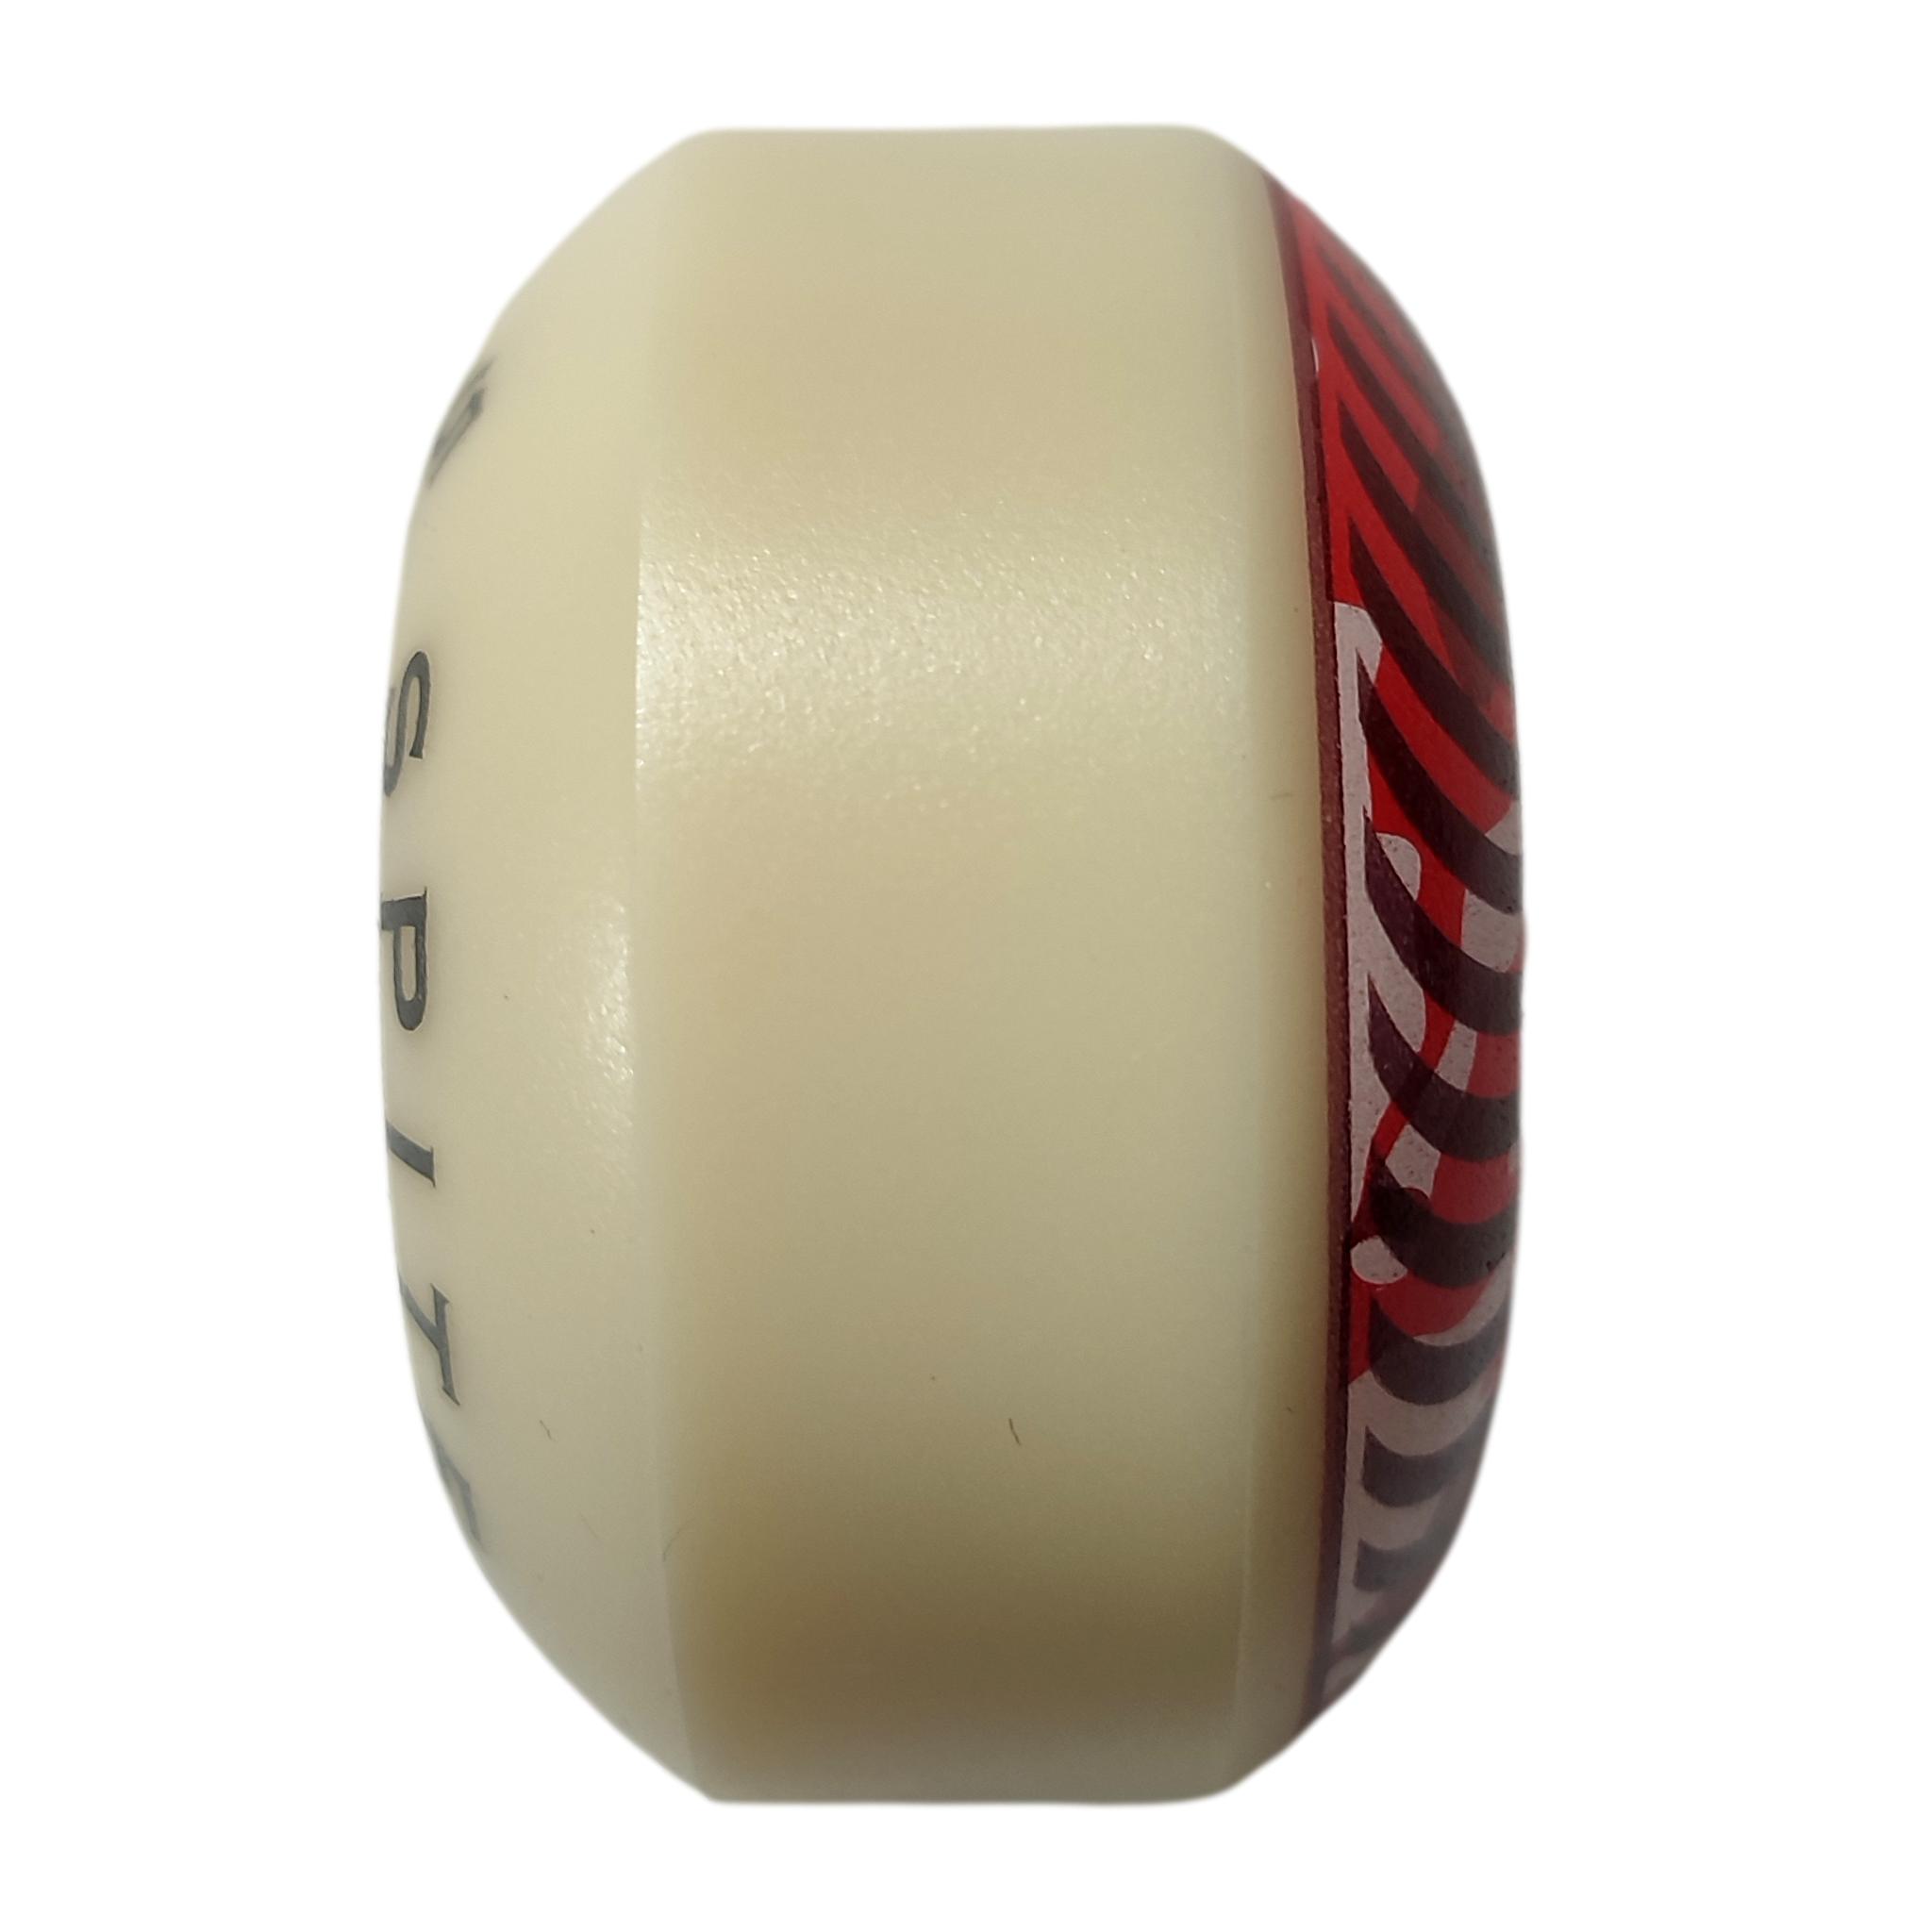 Spitfire Wheels Camo Red Classic F4 51MM 99A